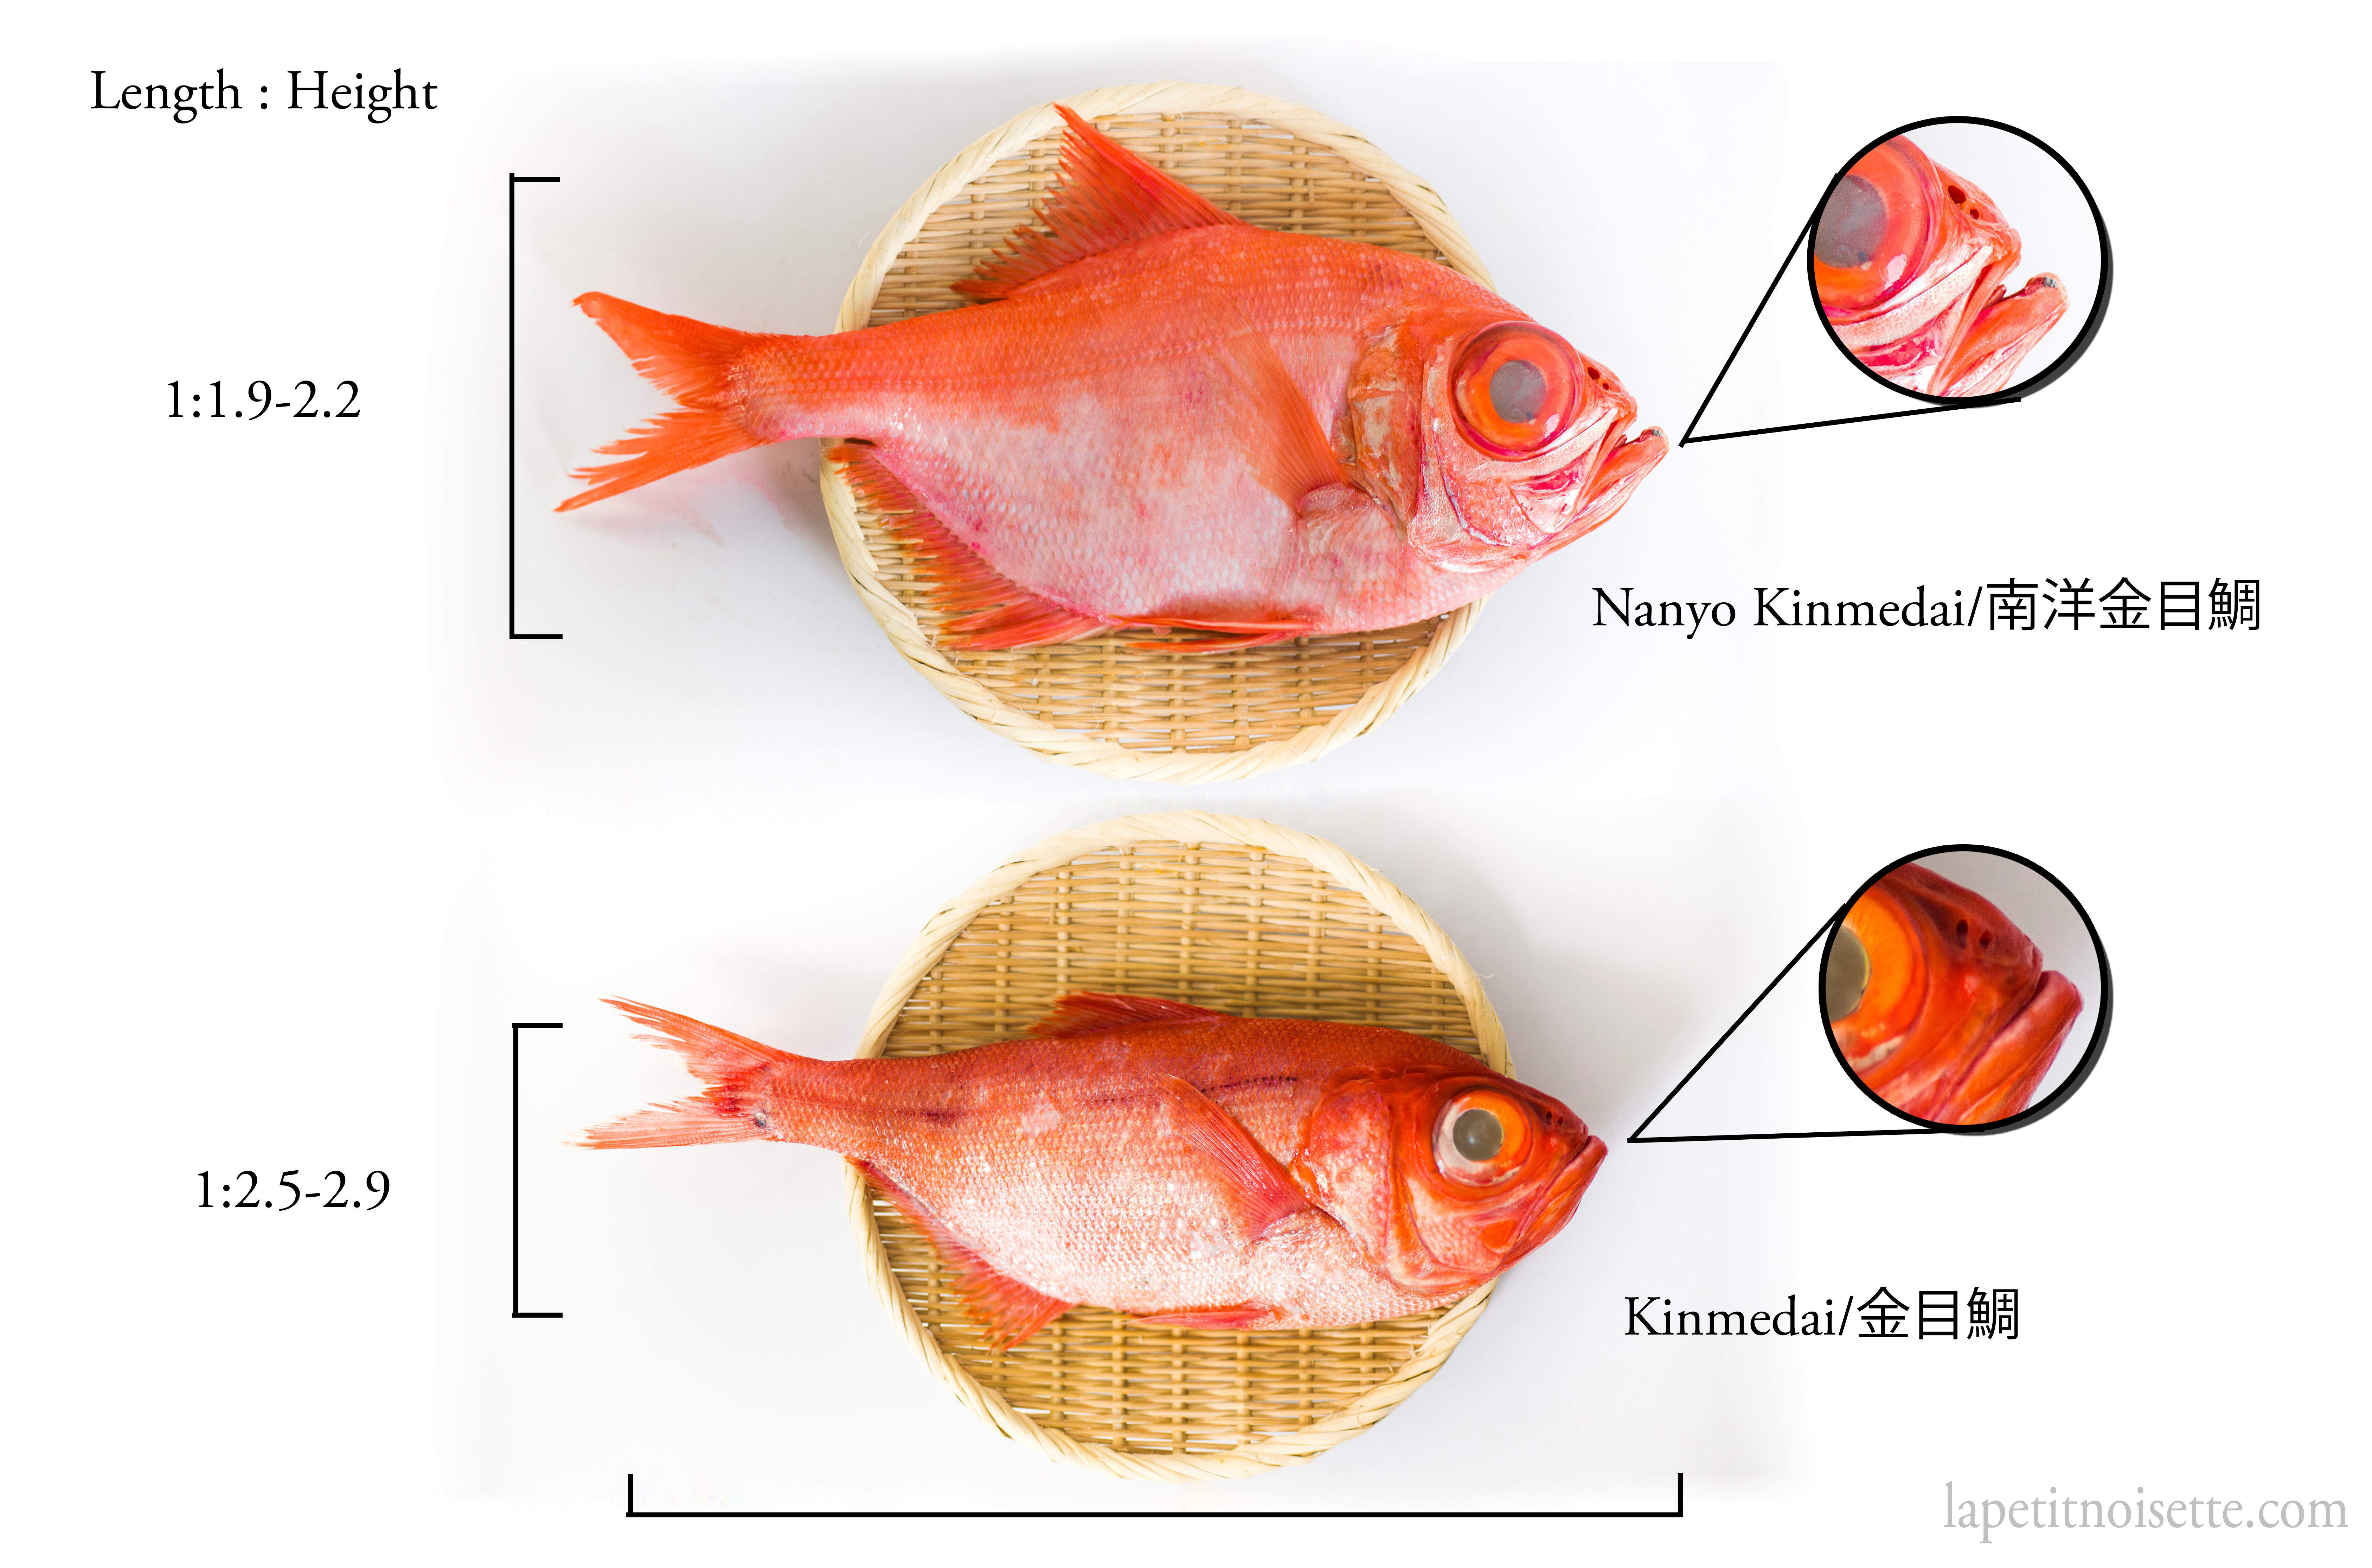 A side by side comparison of kinmedai and nanyo kinmedai showing the difference in length to height ratio.